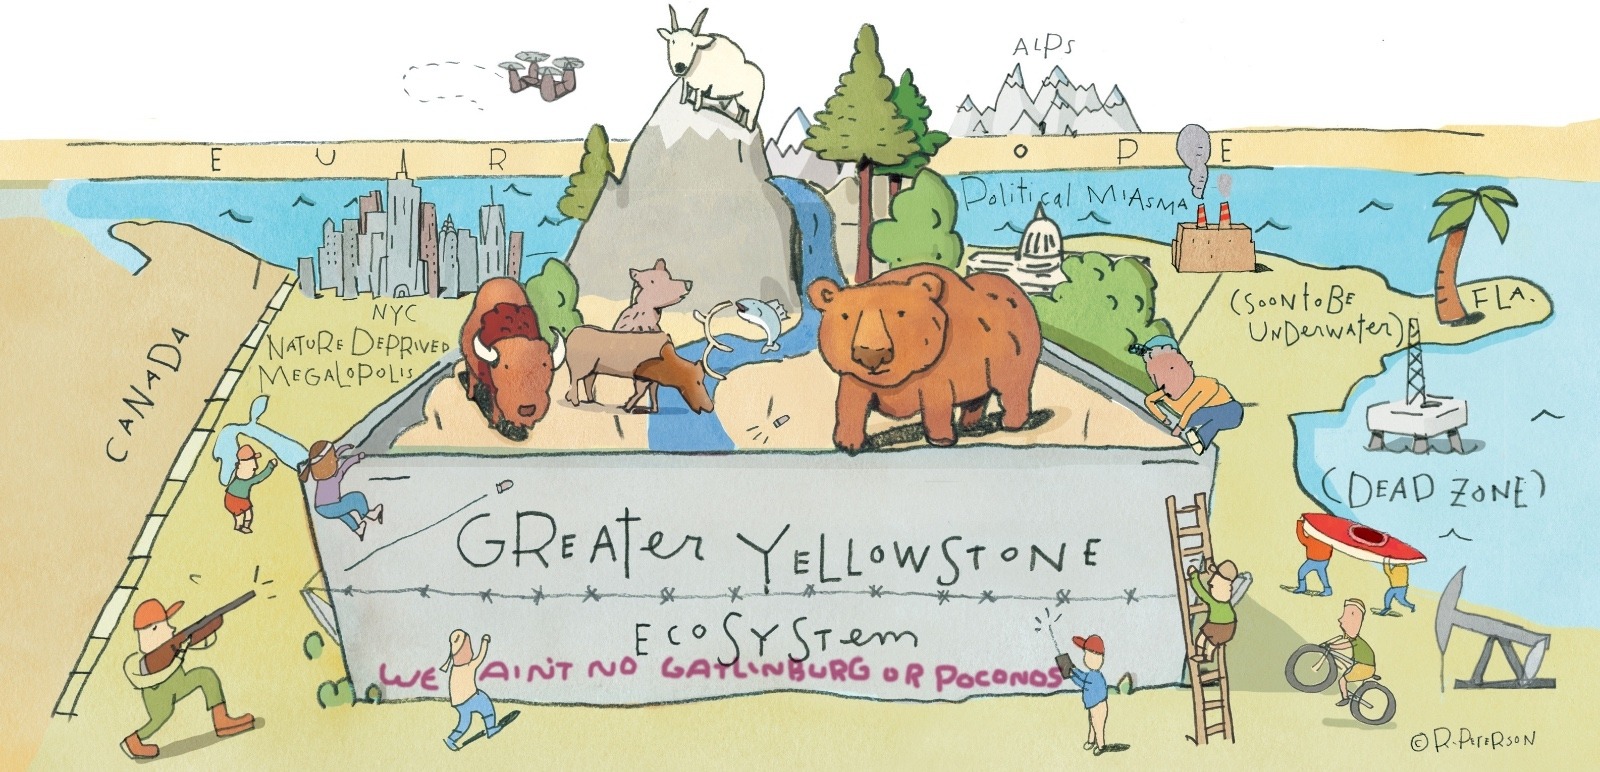 Illustrator Rick Peterson's take on the East Coast from the perspective of Greater Yellowstone.  Click on image to make it larger.